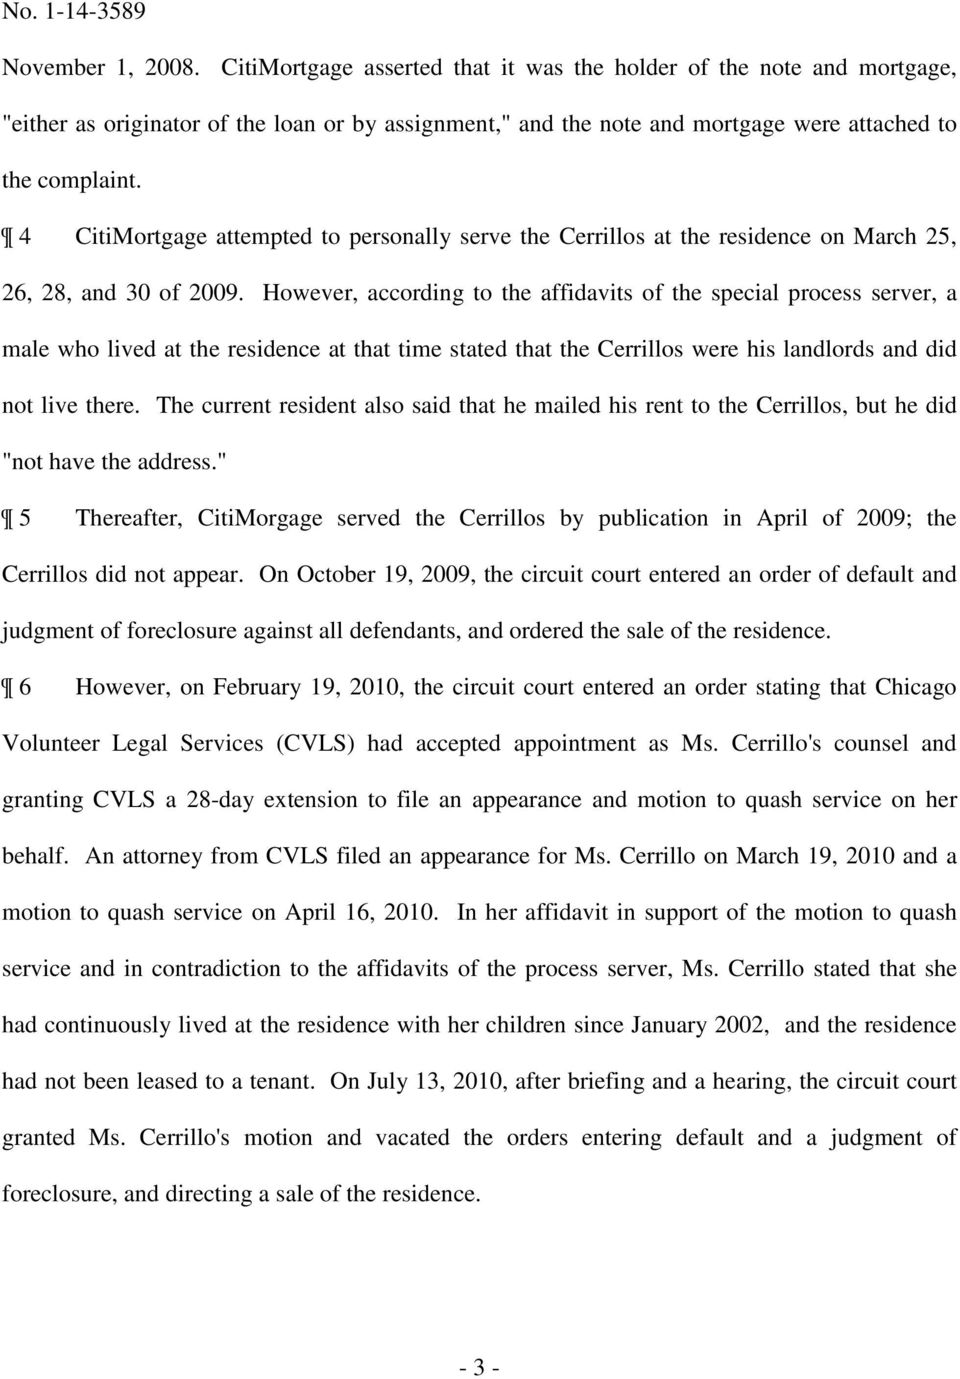 However, according to the affidavits of the special process server, a male who lived at the residence at that time stated that the Cerrillos were his landlords and did not live there.